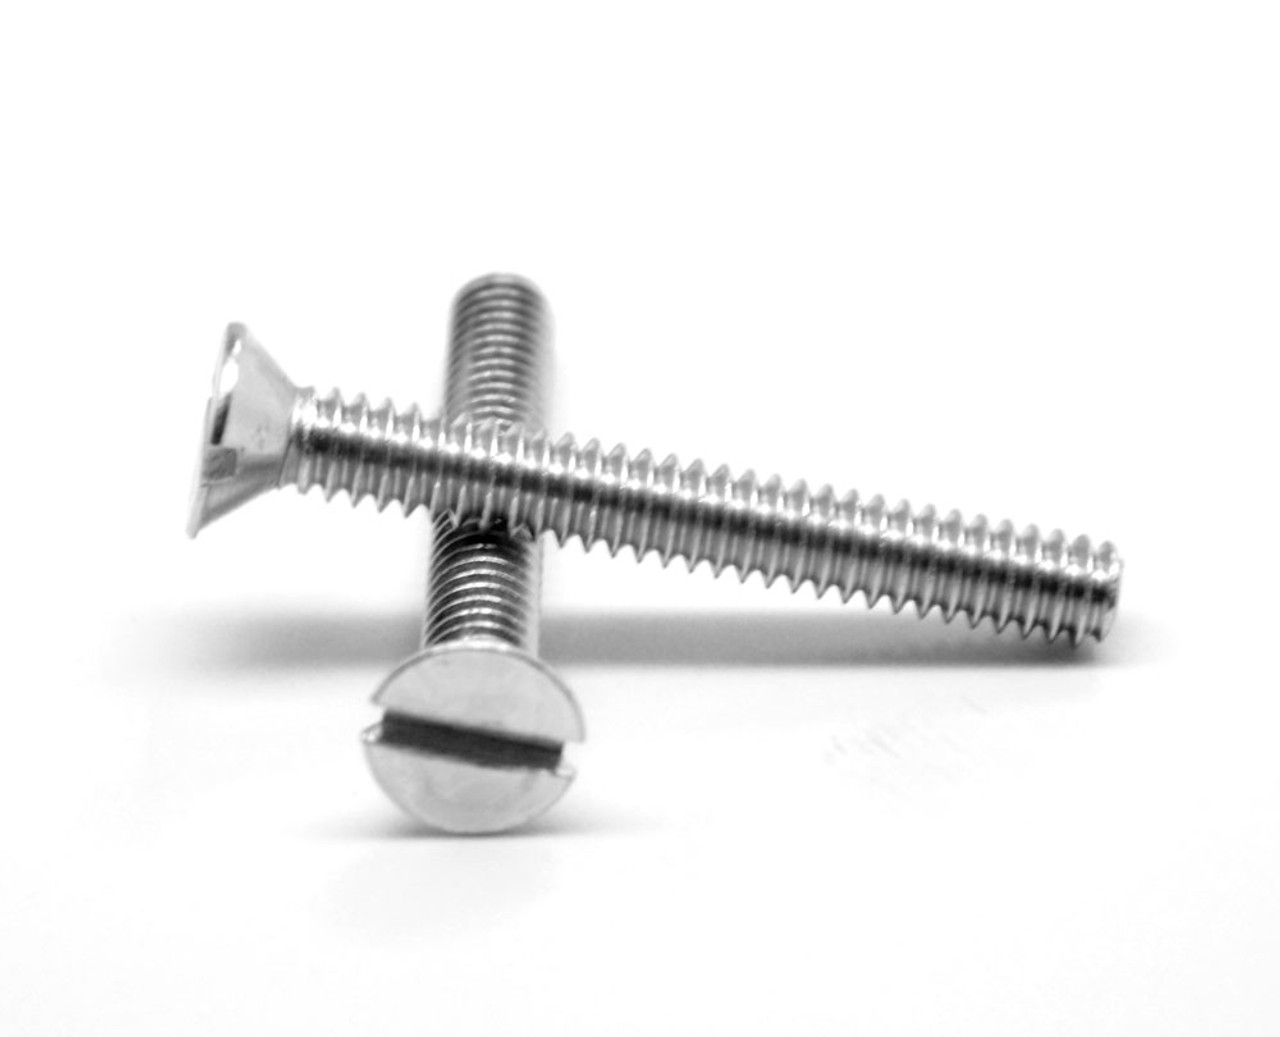 #10-32 x 1" (FT) Fine Thread Machine Screw Slotted Flat Head Stainless Steel 18-8